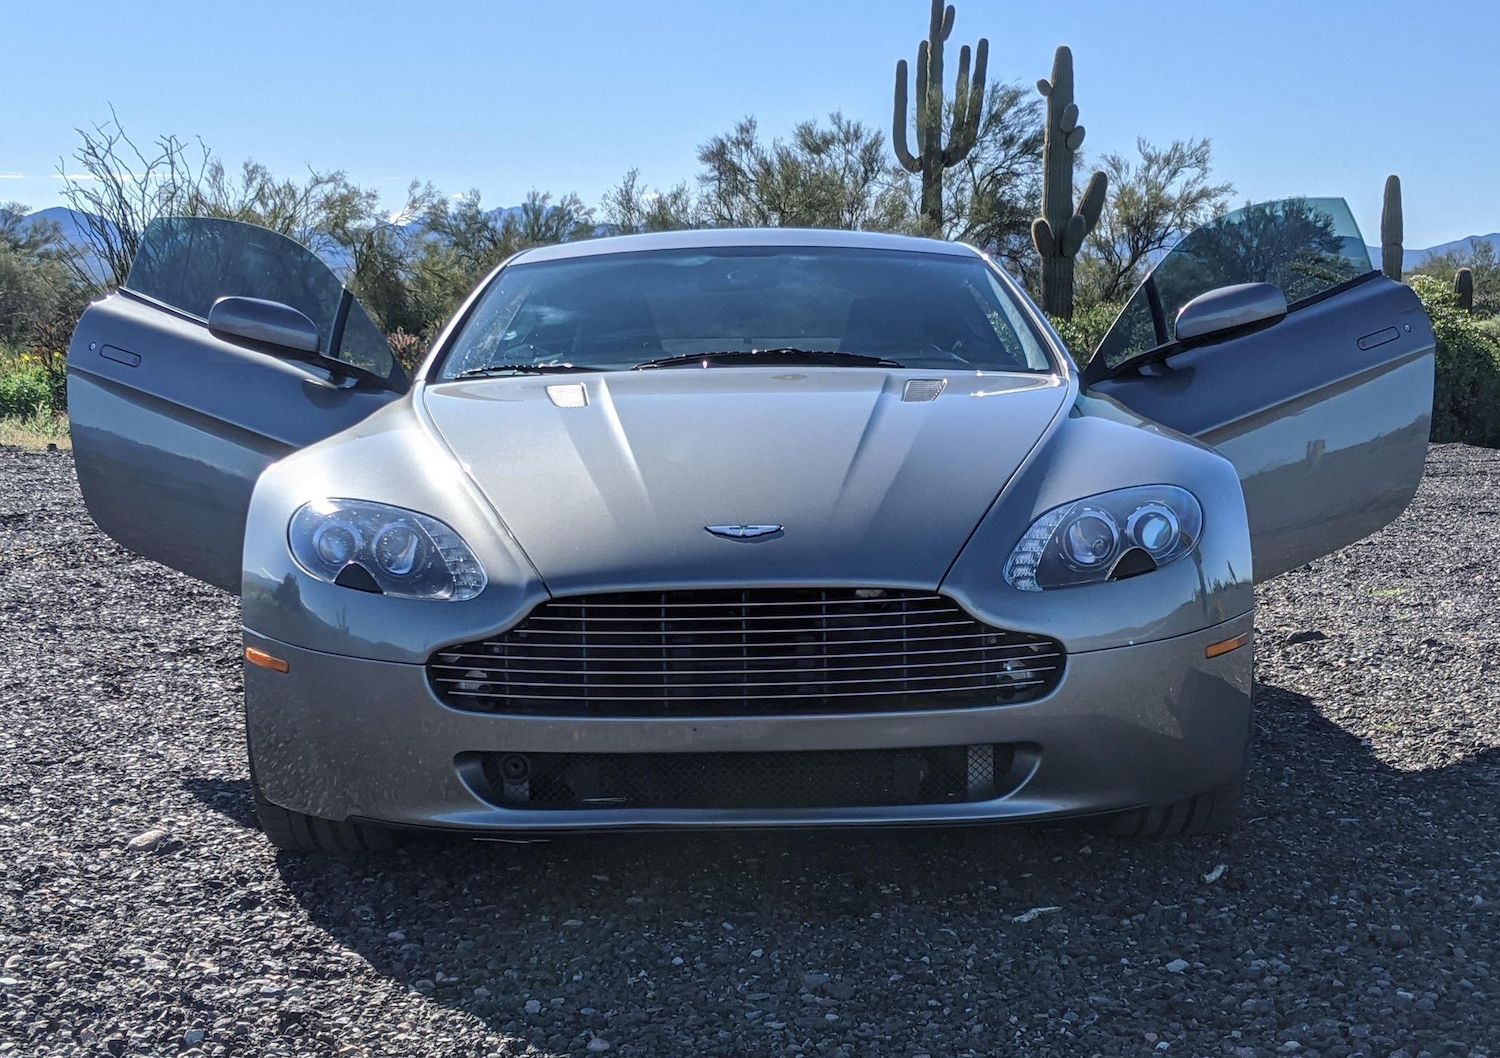 The grille of a silver Aston Martin Vantage with its doors open, cactuses visible in the background.